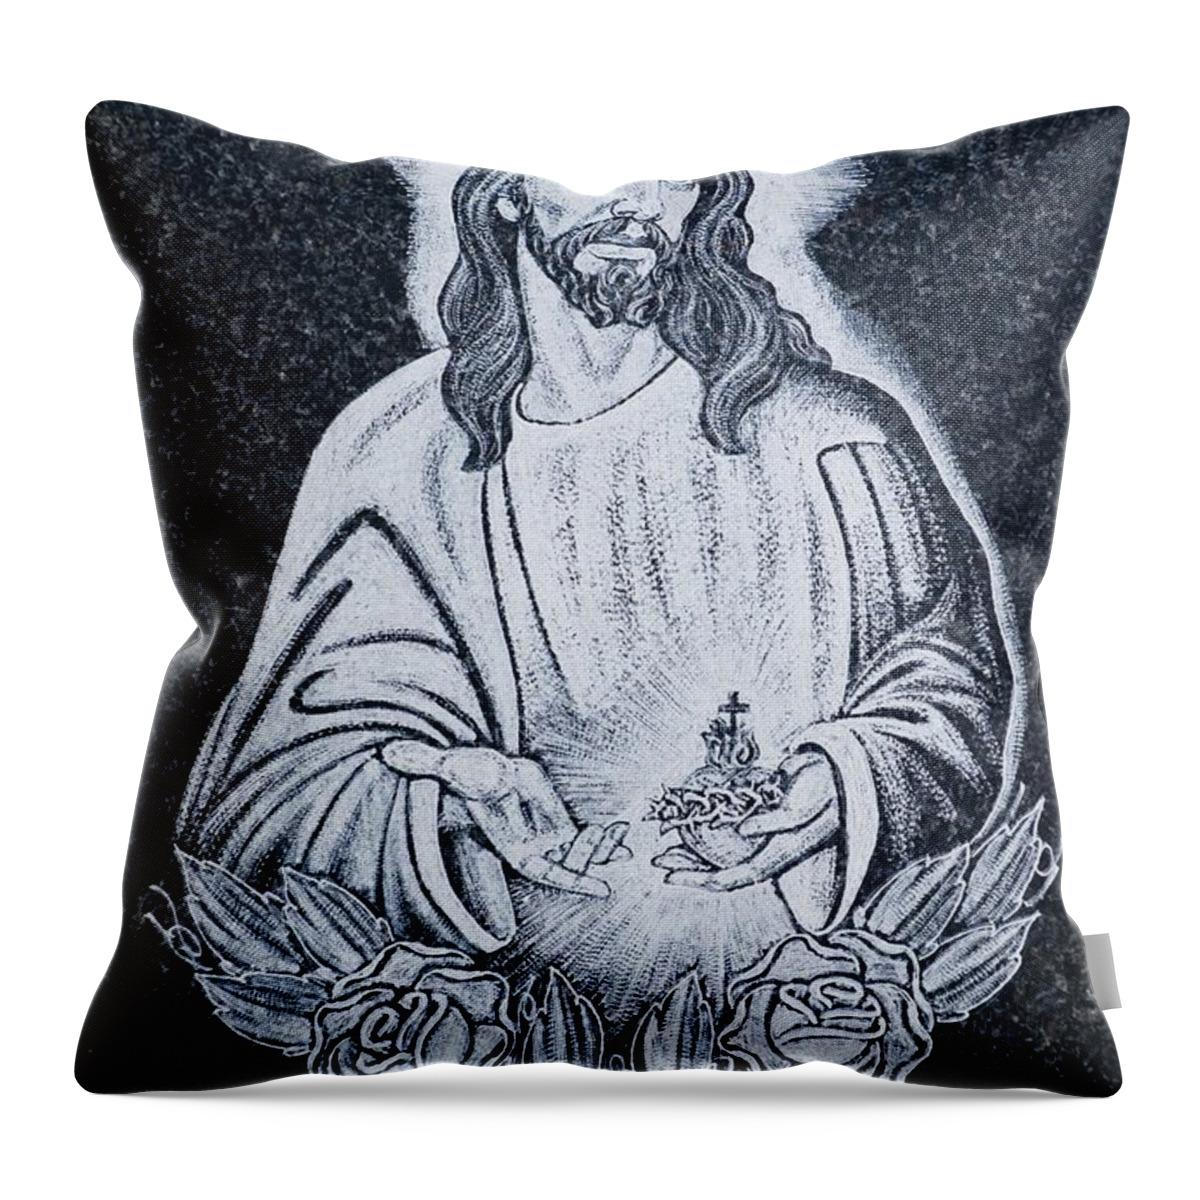 Burial Grounds Throw Pillow featuring the photograph Religious Icons In Spanish Cemetery by Michael Thornton